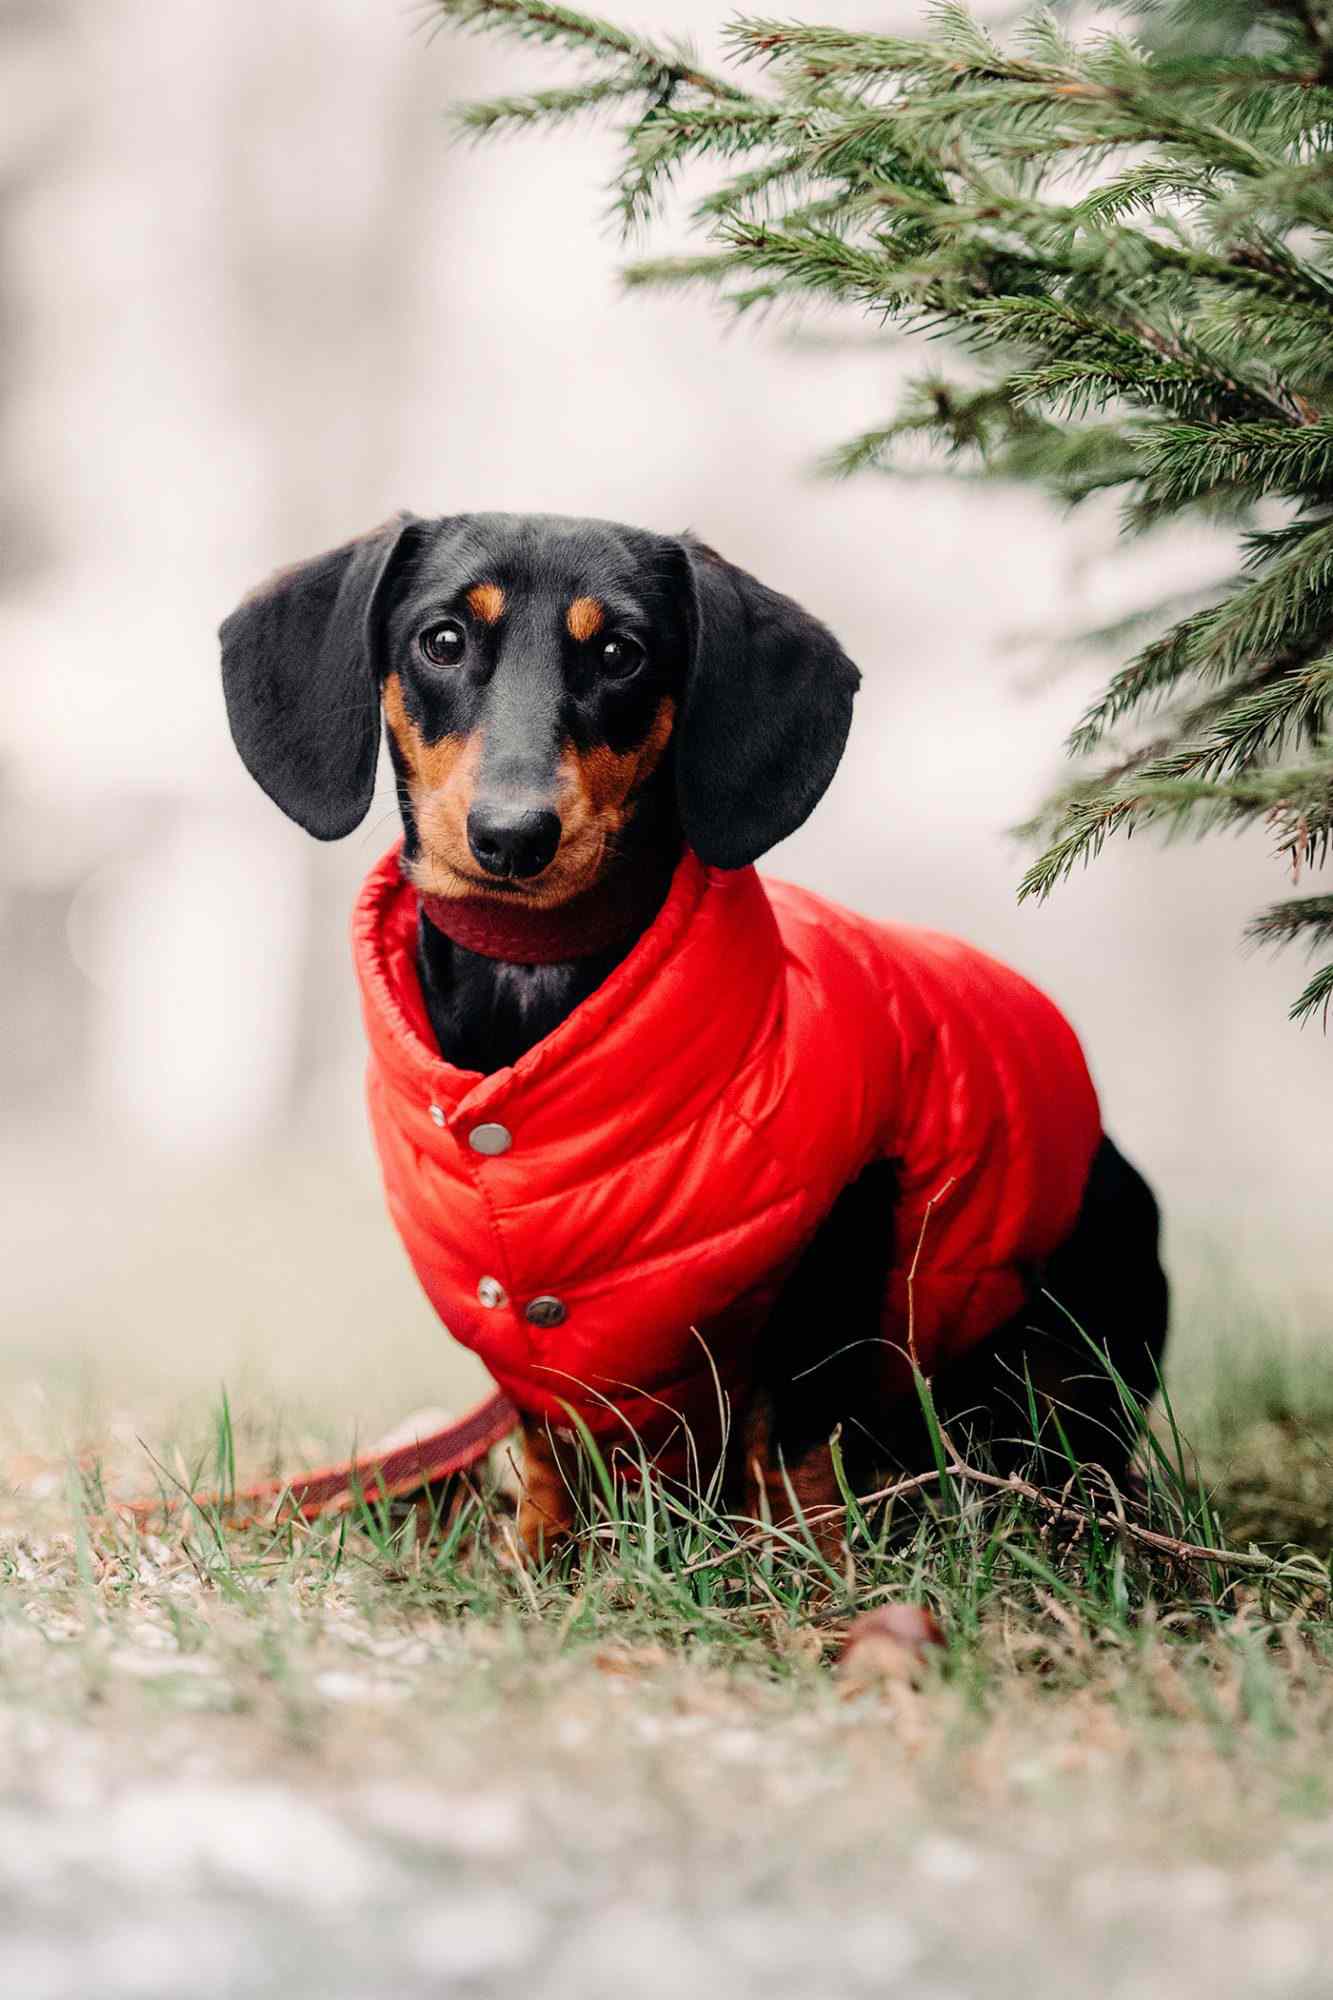 balck-and-tan Dachshund wearing red jacket